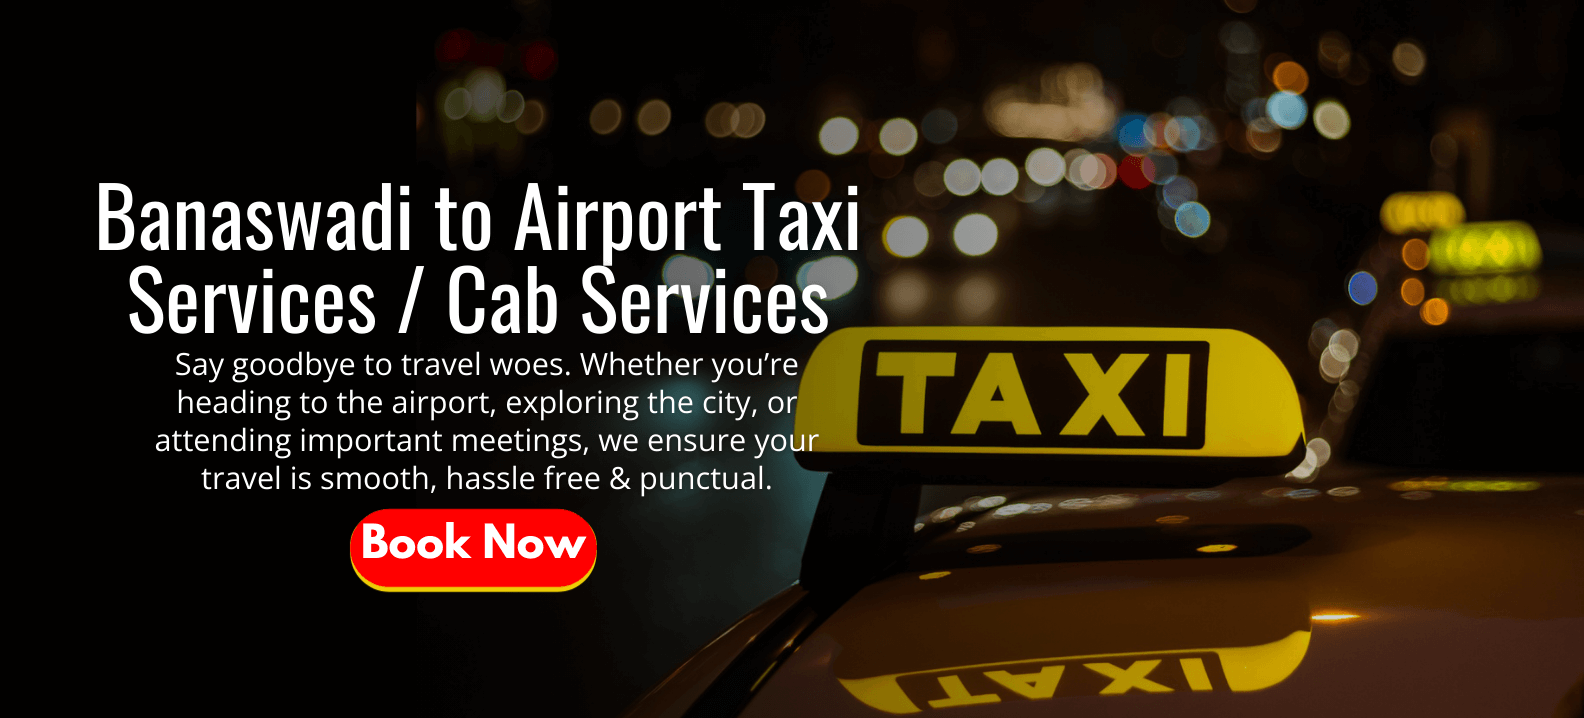 Banaswadi to Airport Taxi Services _ Cab Services